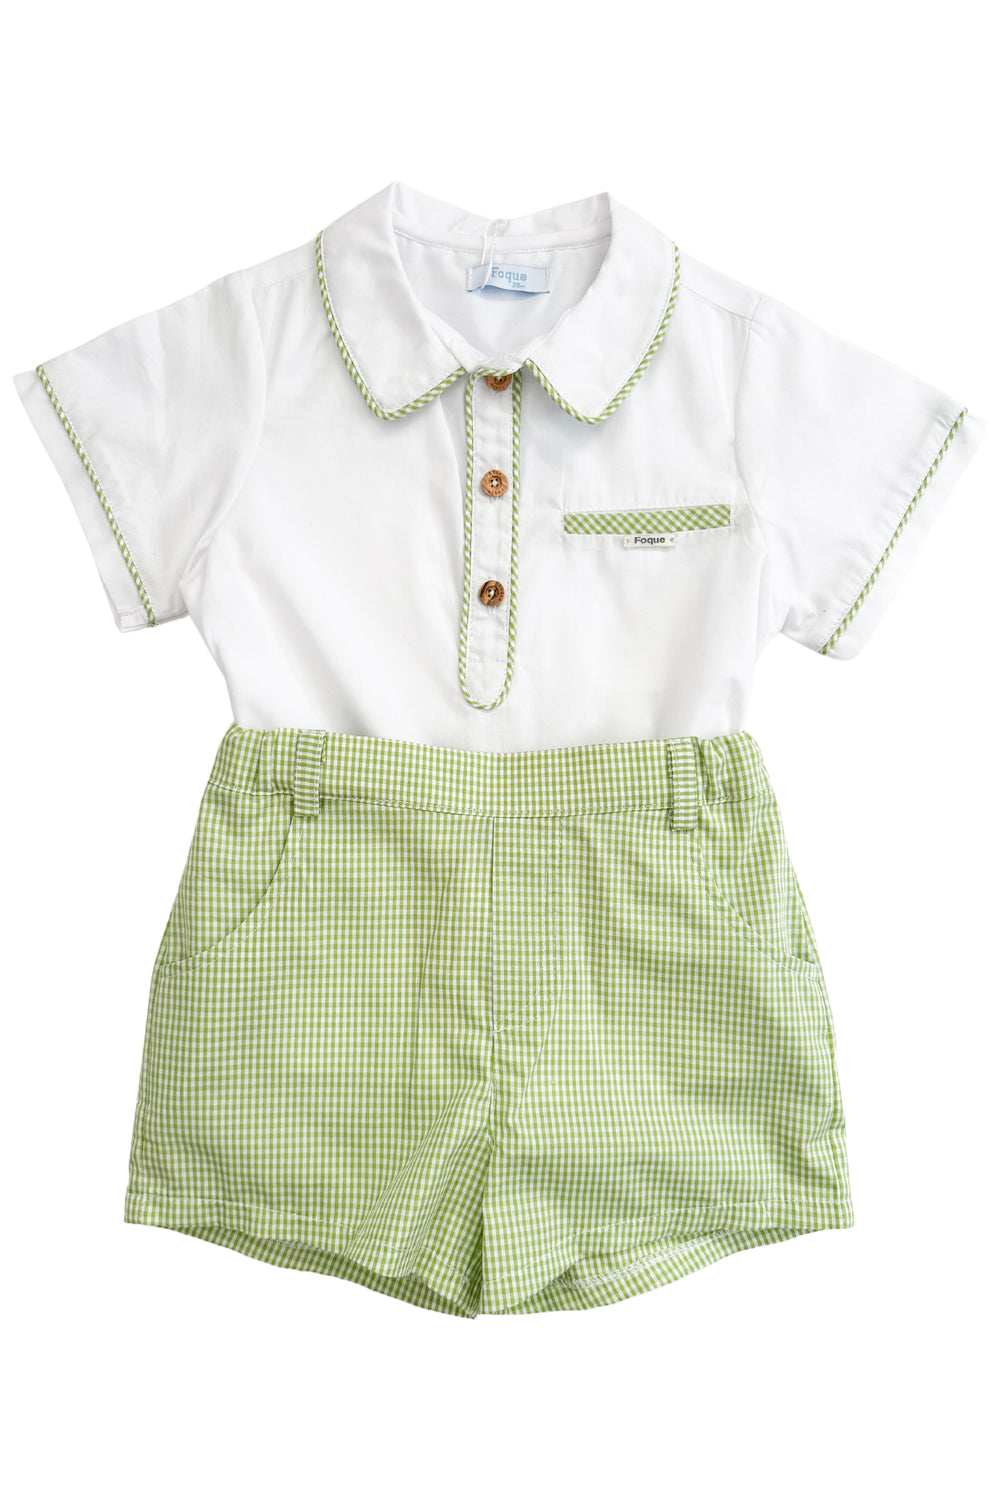 Foque PREORDER "Luca" Shirt & Green Gingham Shorts | iphoneandroidapplications